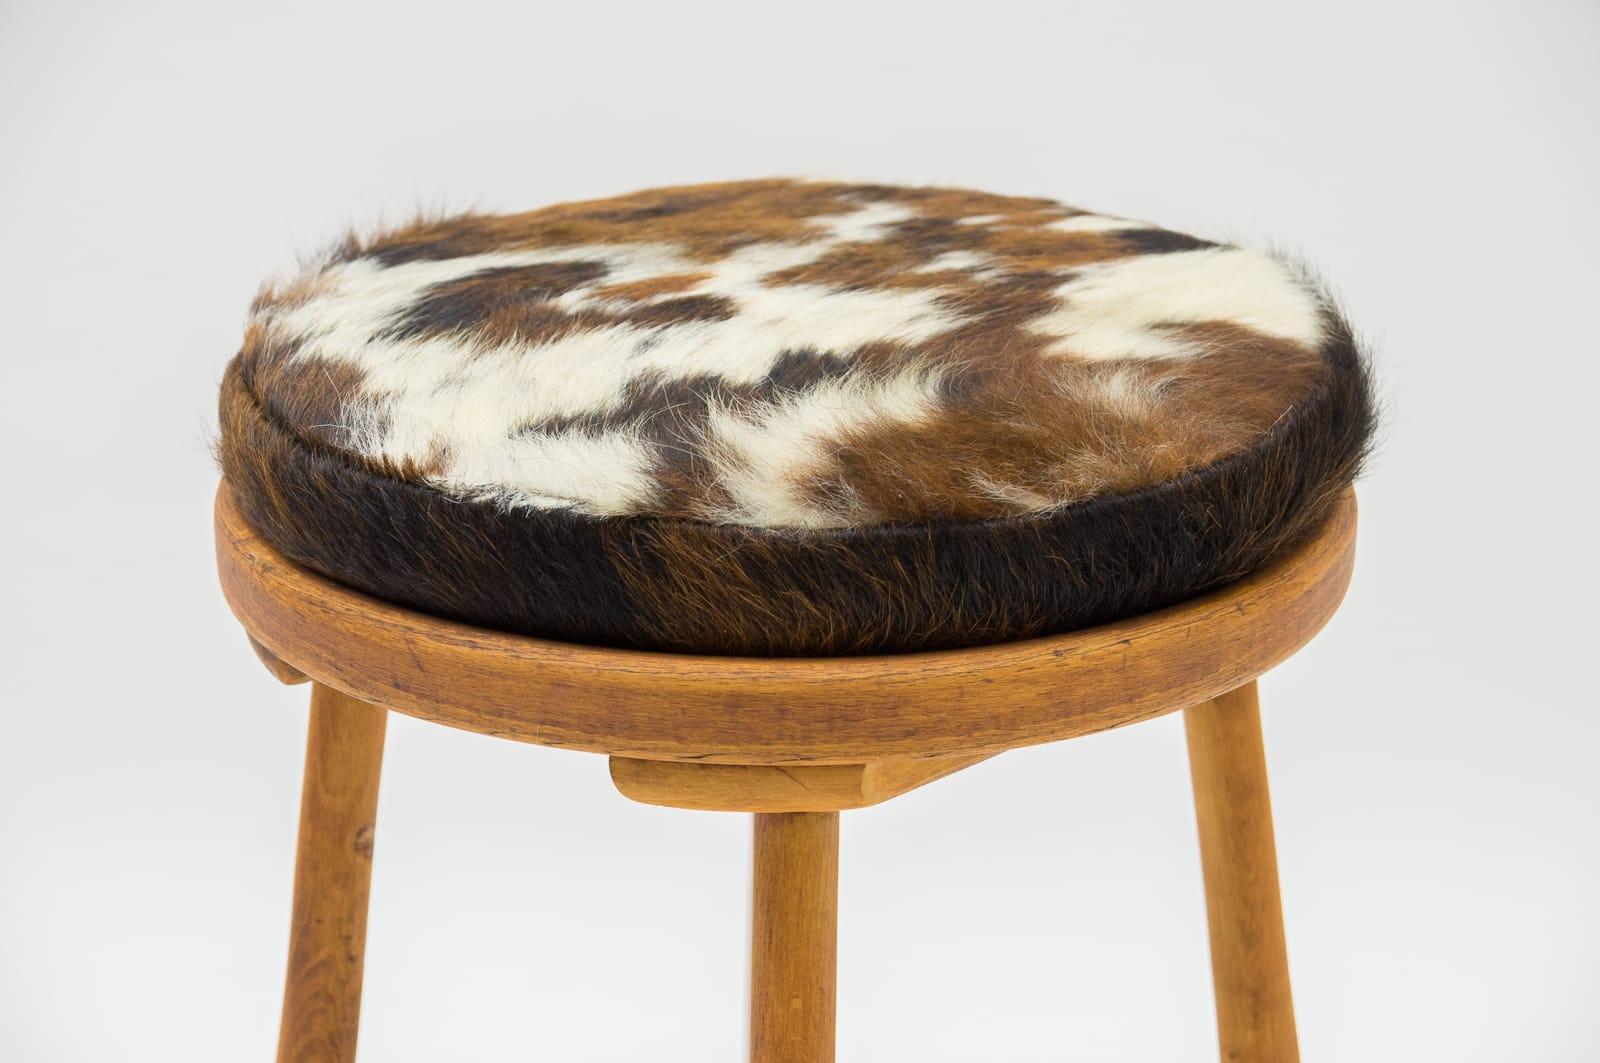 European Mid-Century Modern Wooden Stool with Cow Skin Upholstery, France, 1950s